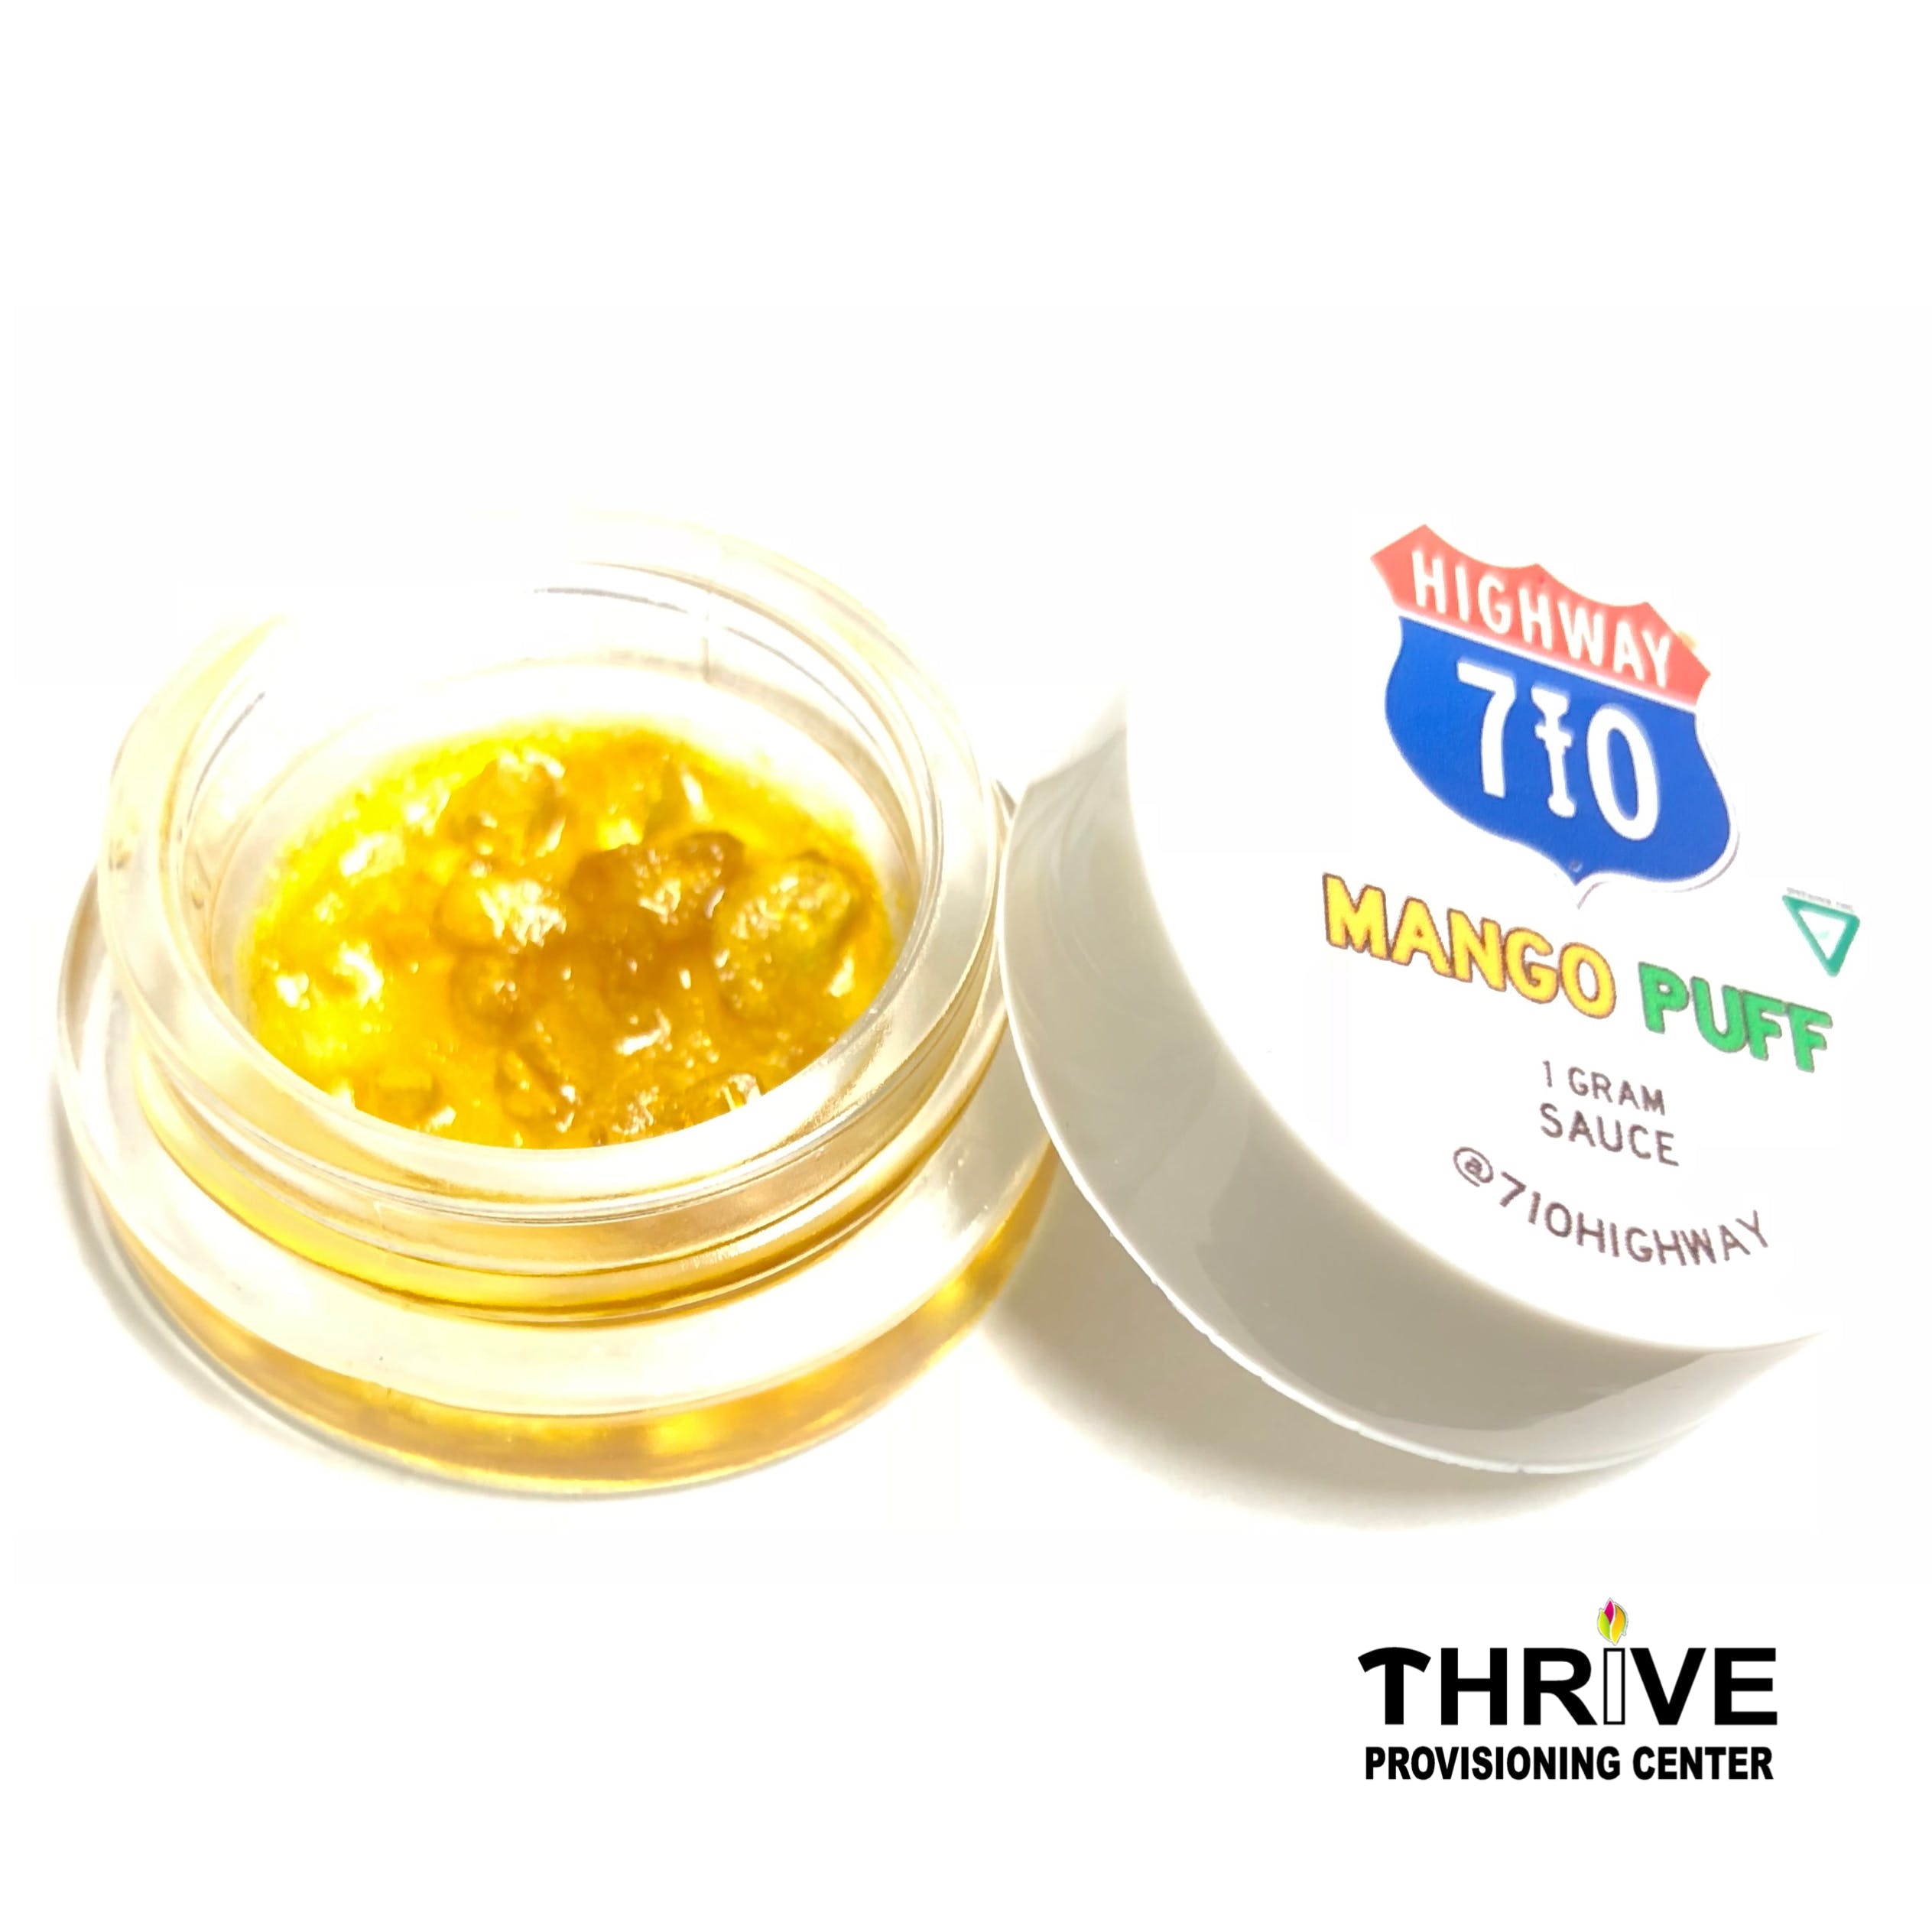 concentrate-highway-710-sauce-mango-puff-1-gram